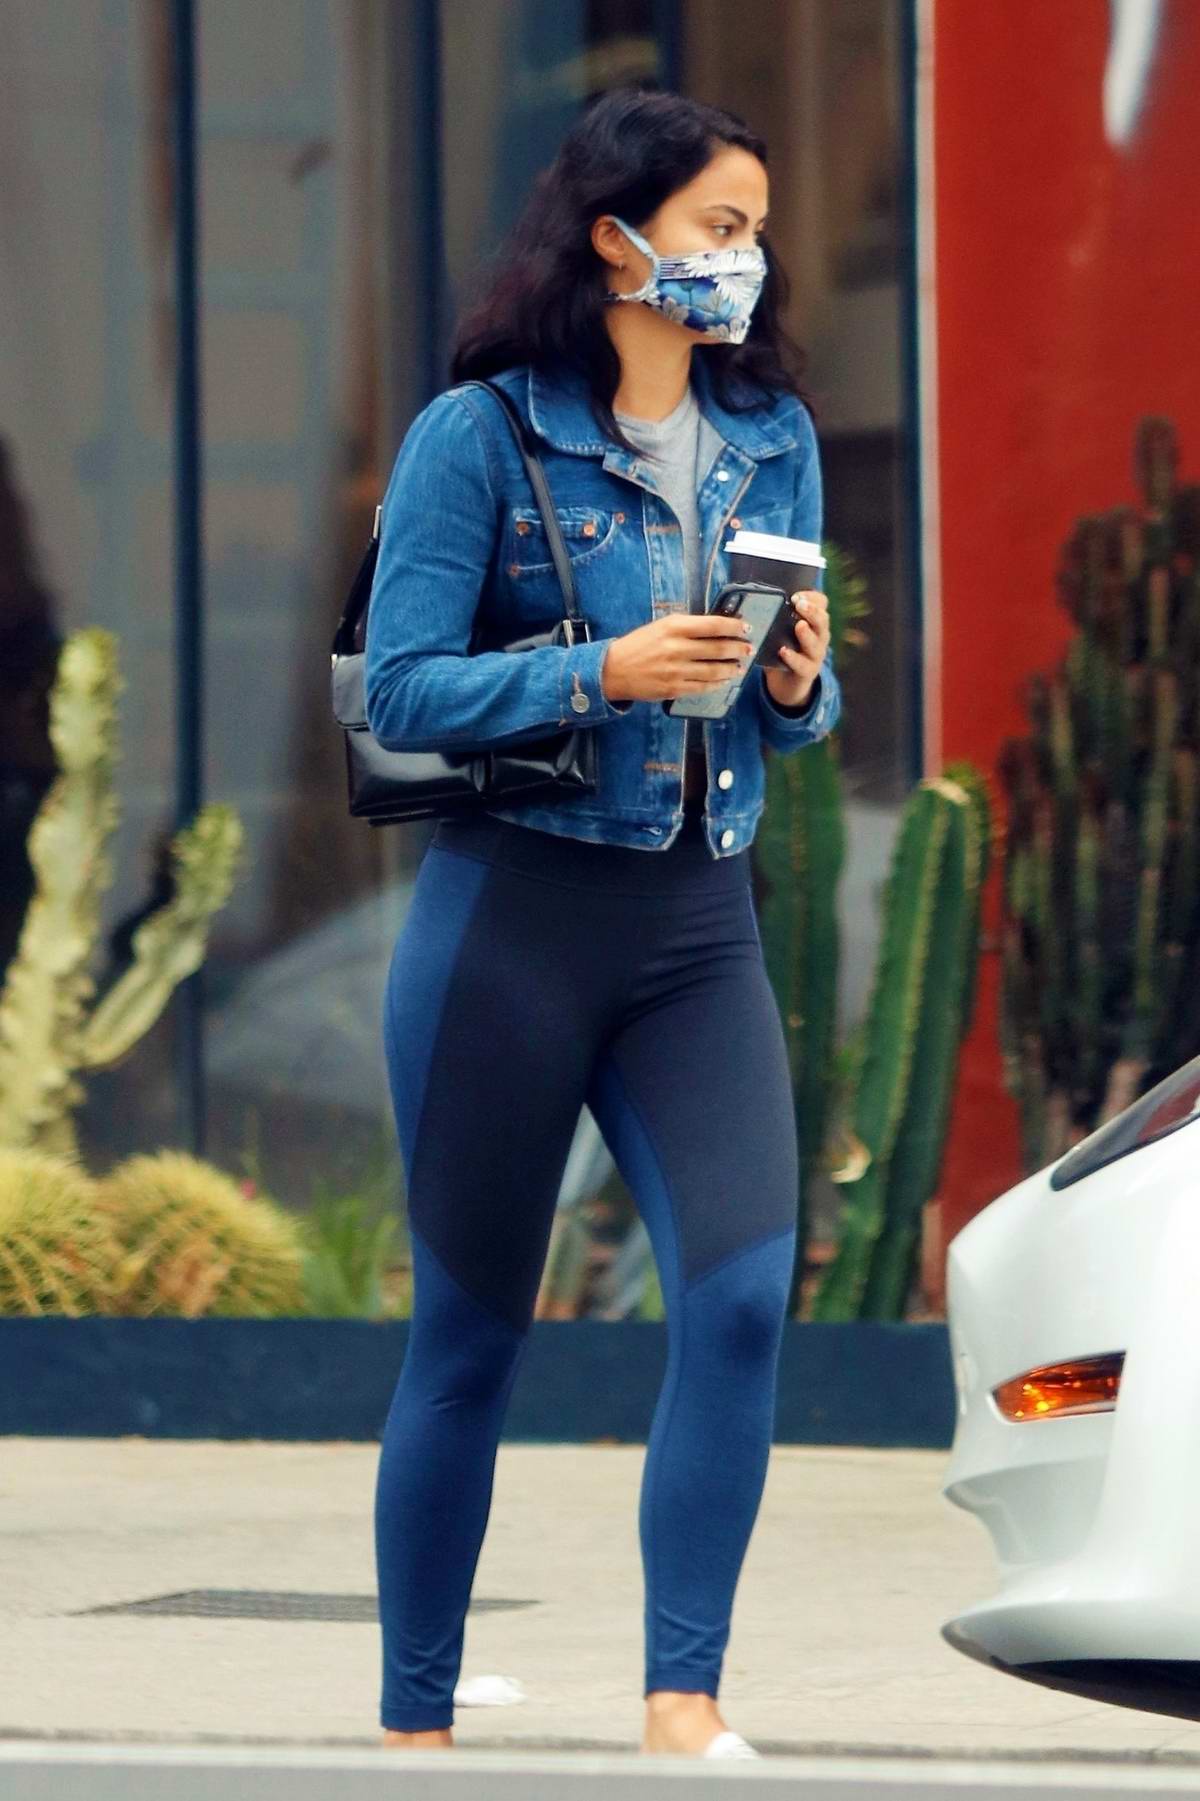 Camila Mendes Shows Off Her Toned Legs In Navy Leggings While Making A Coffee Run In Her Tesla